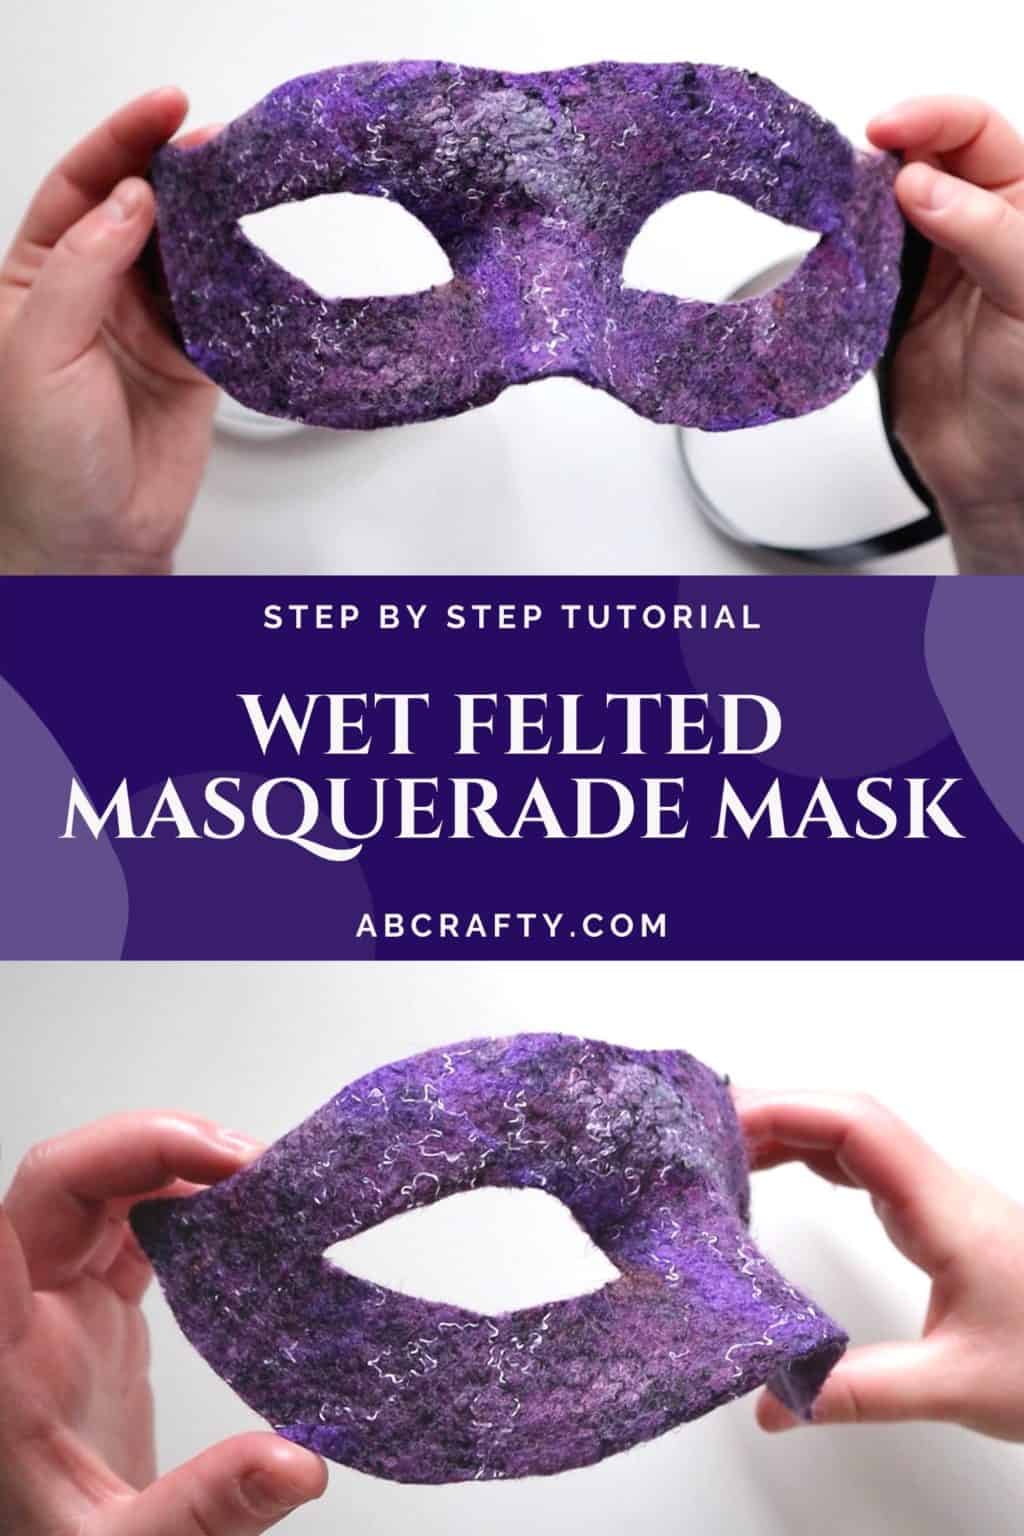 top photo is holding the purple wet felted Venetian mask facing front with the bottom showing the side of the mask